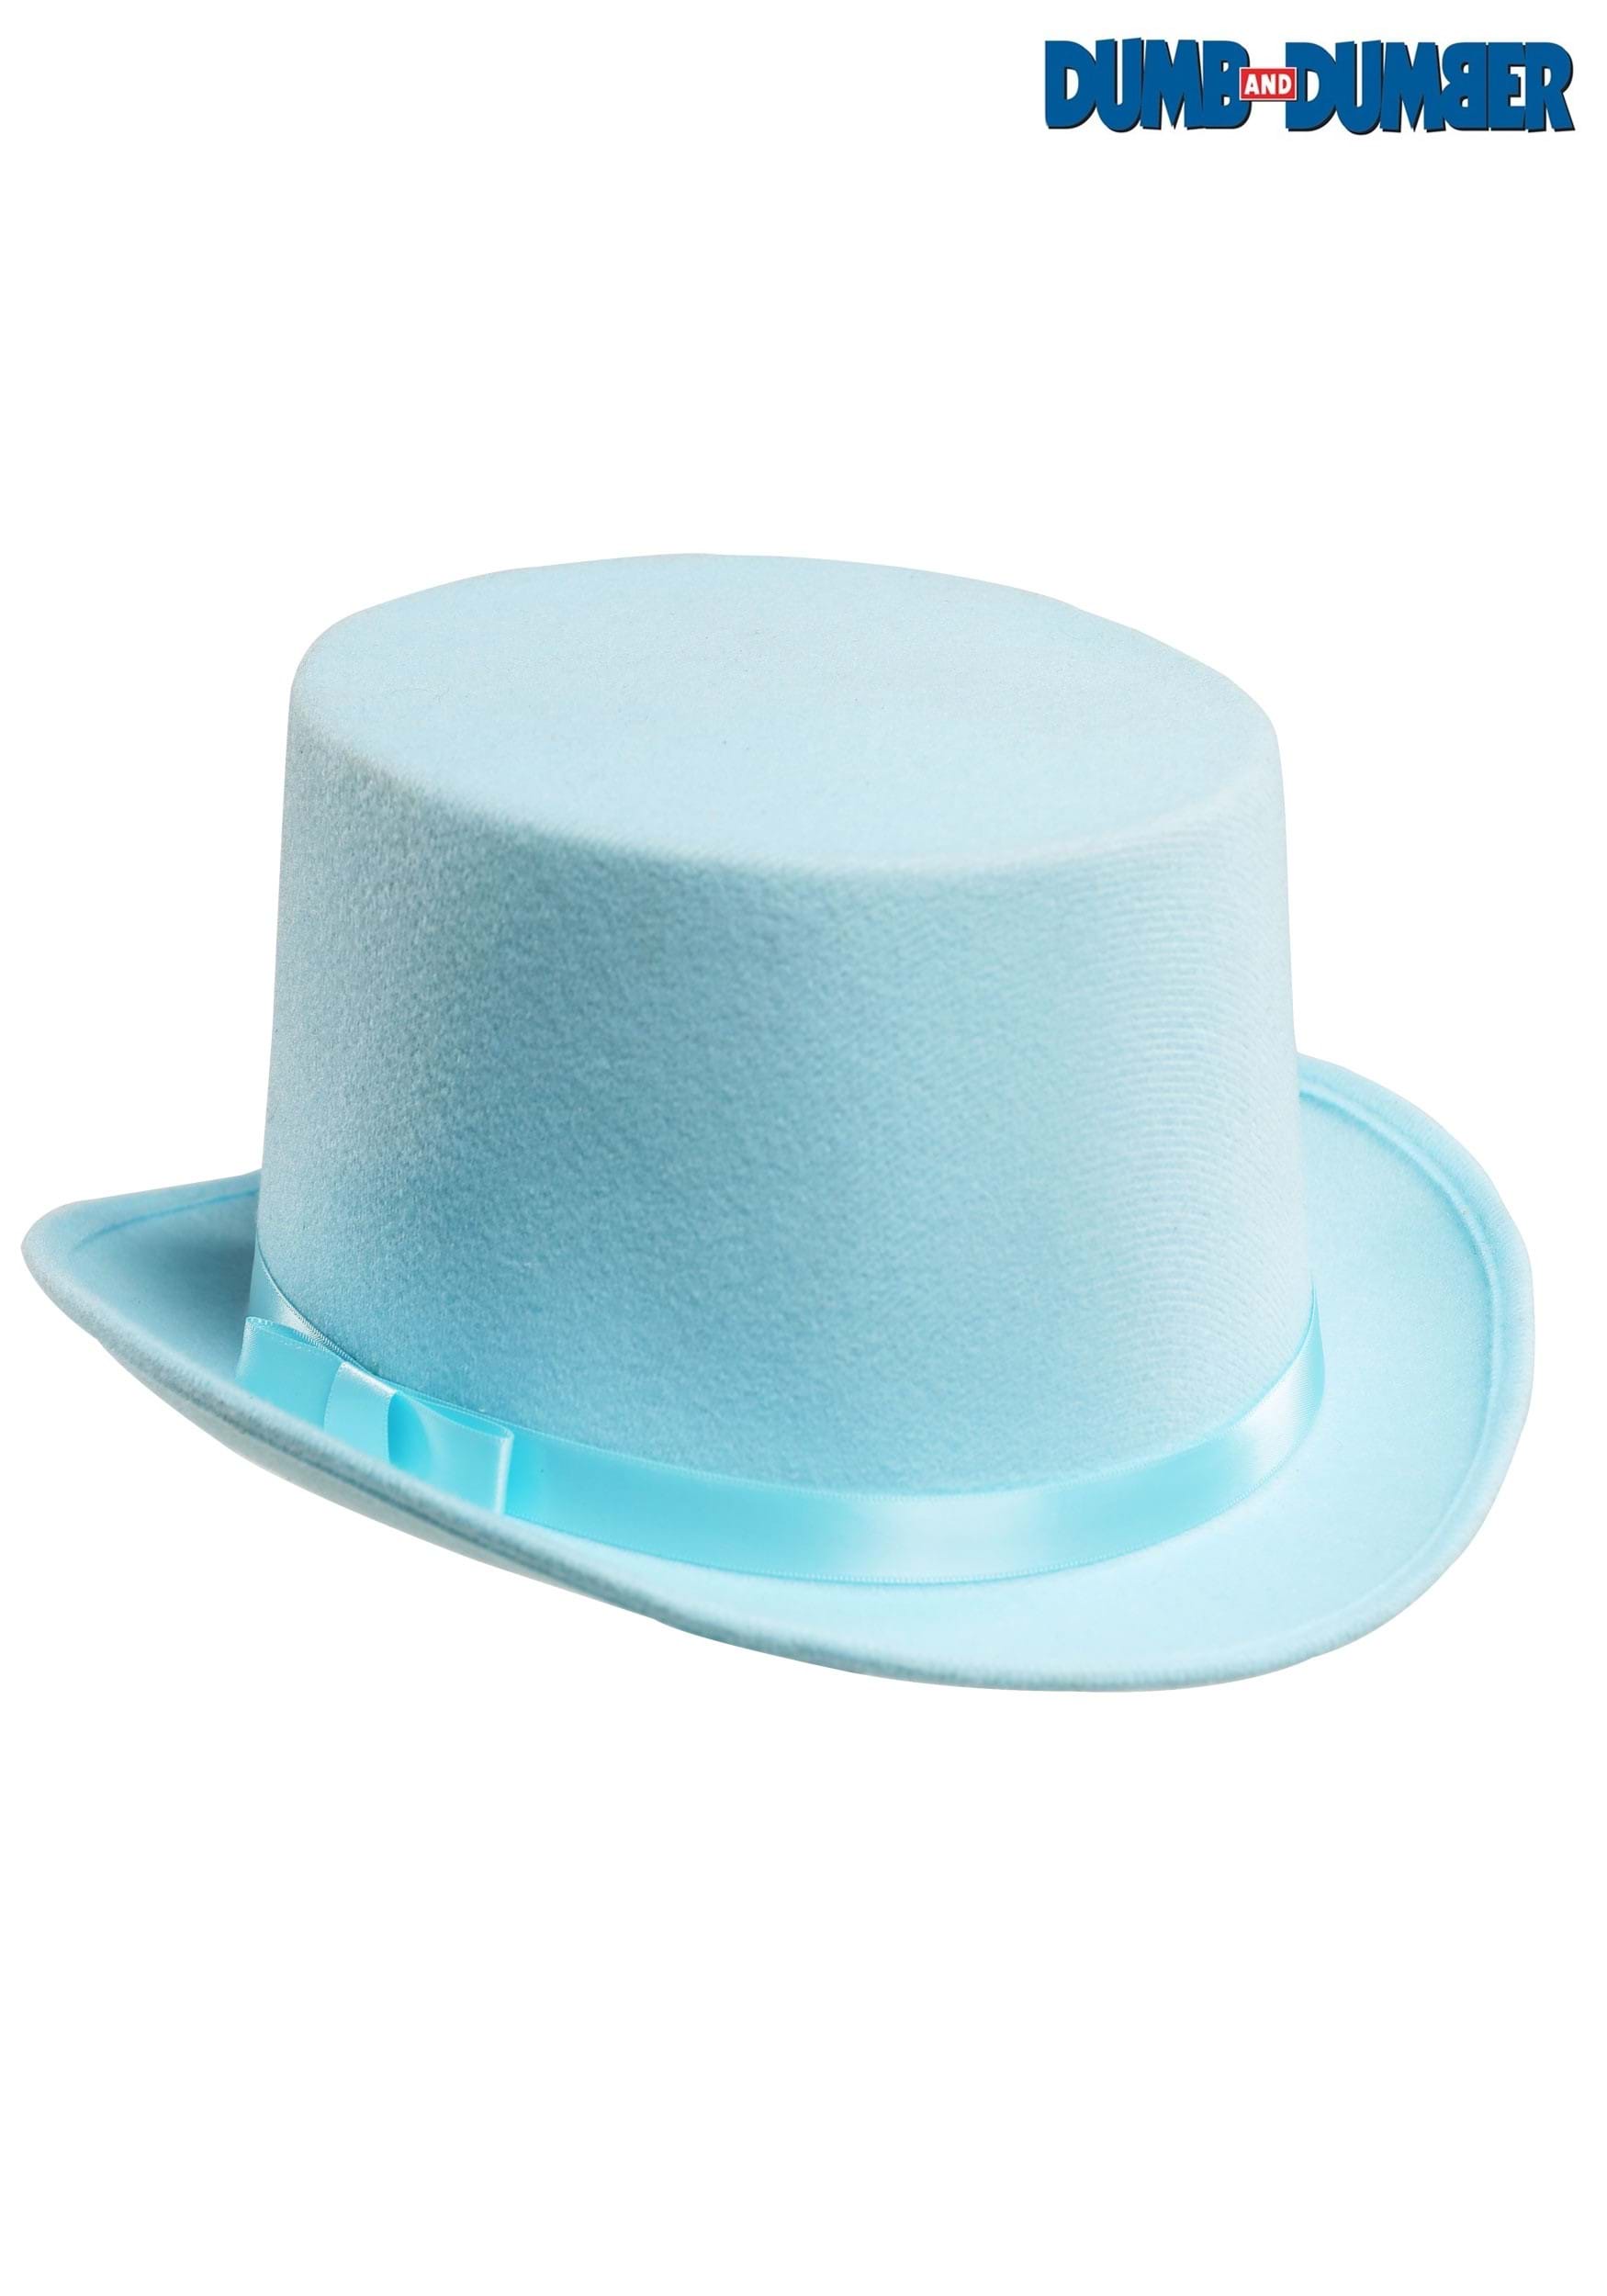 Dumb and Dumber Blue Tuxedo Costume Top Hat for Adults